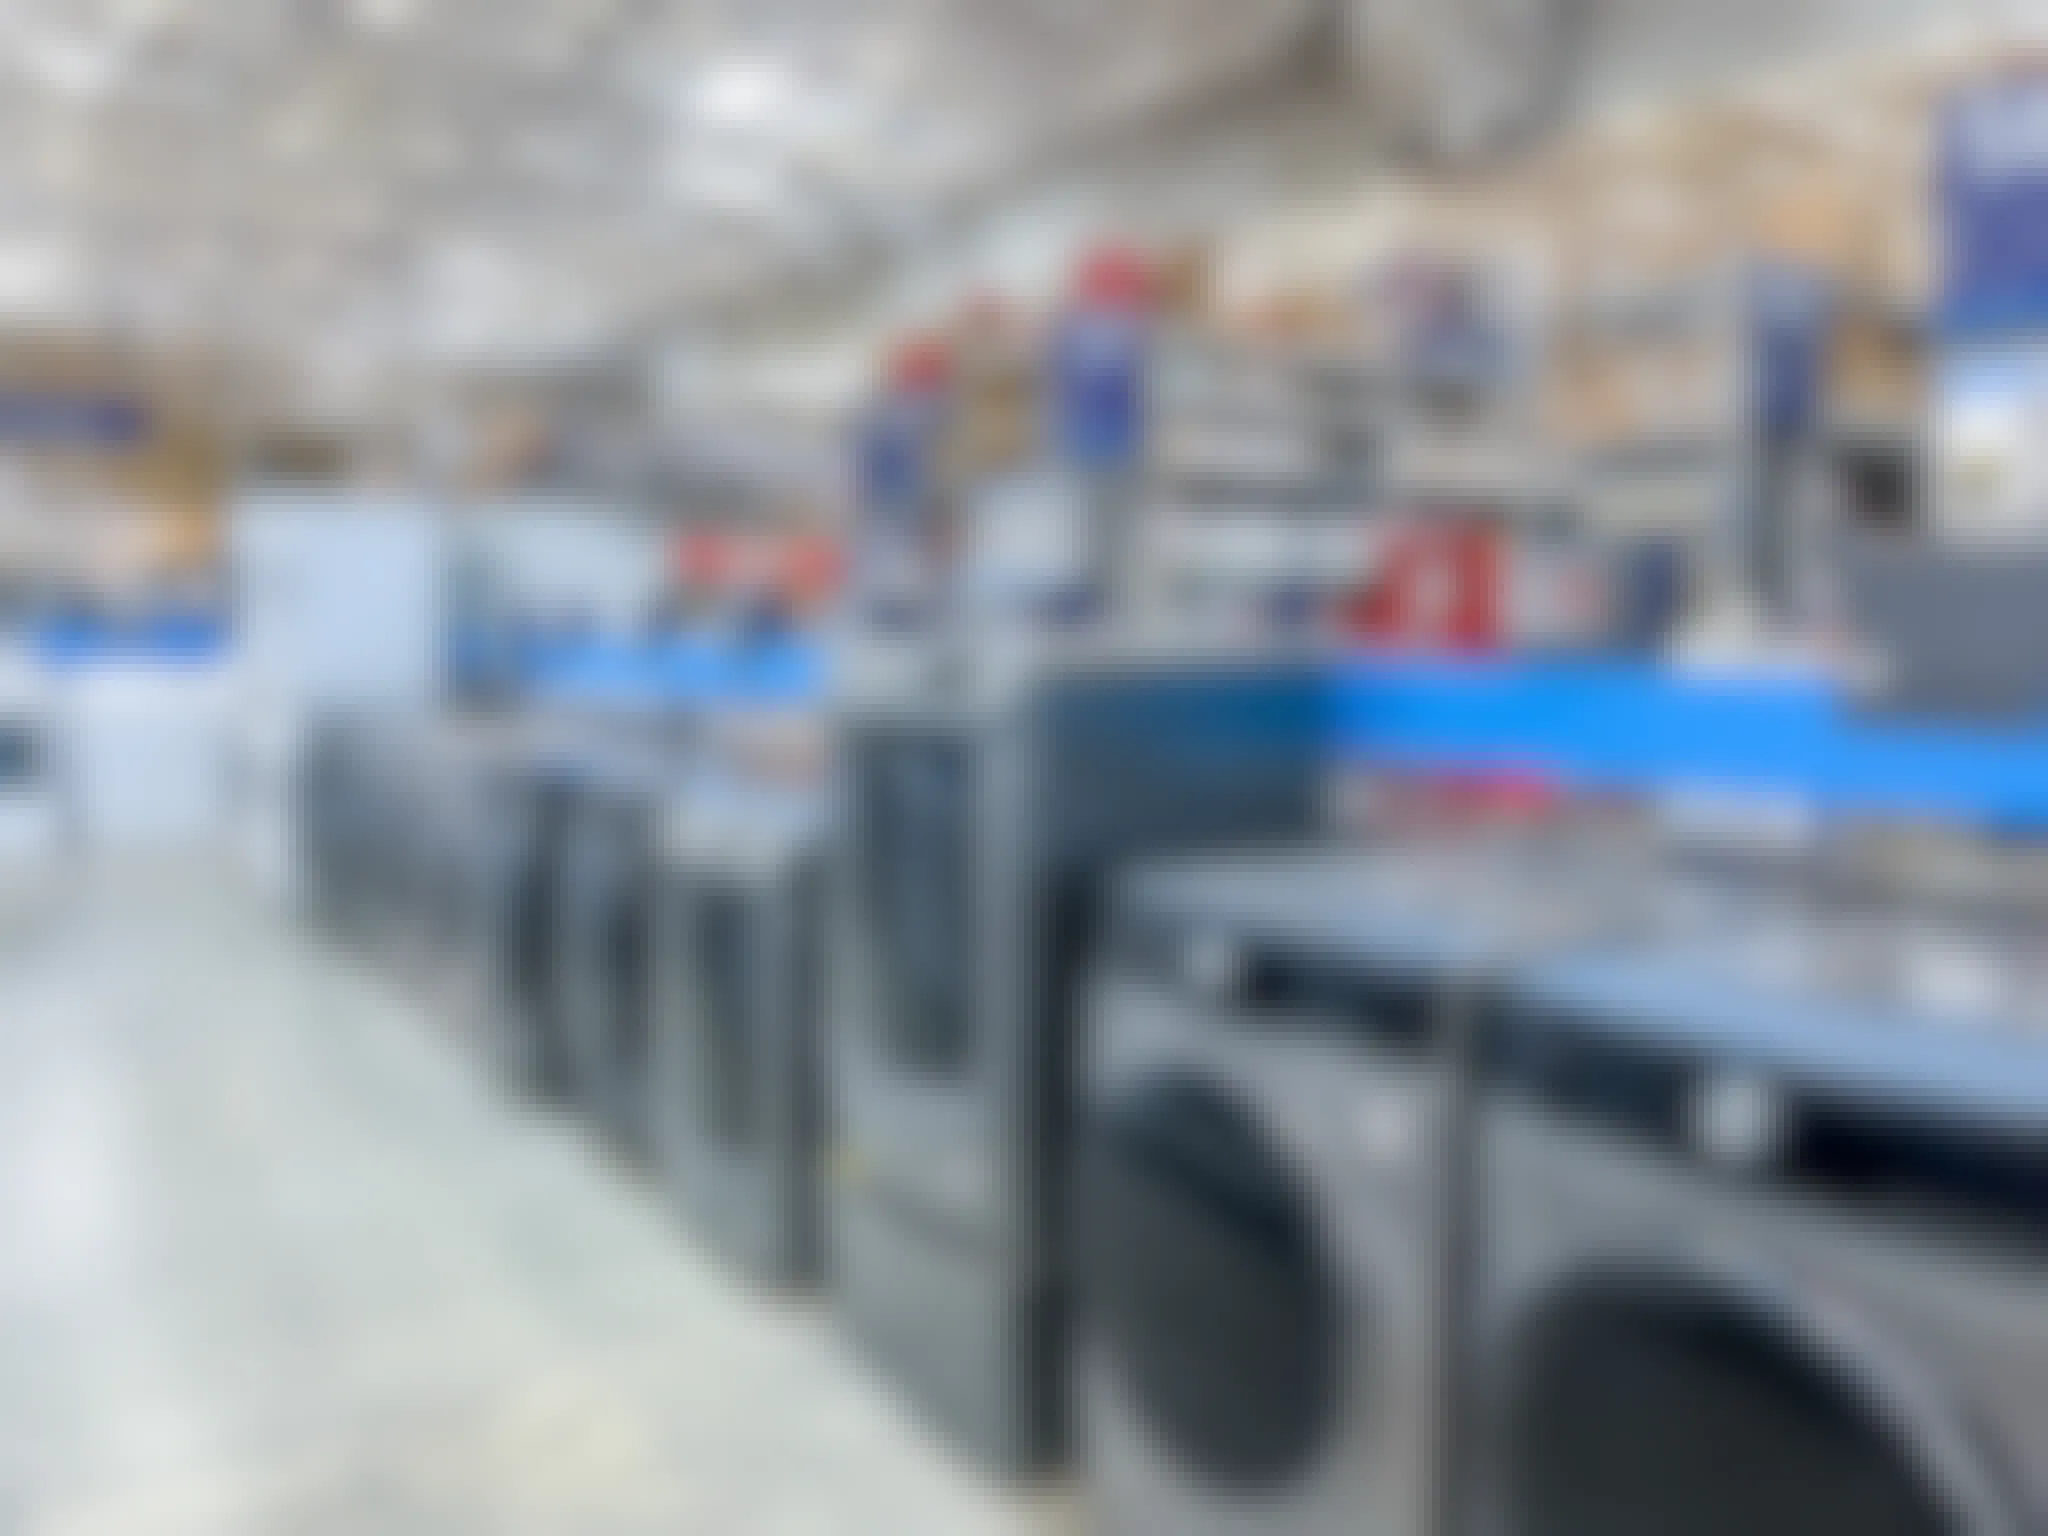 washer and dryer appliances at Lowe's store